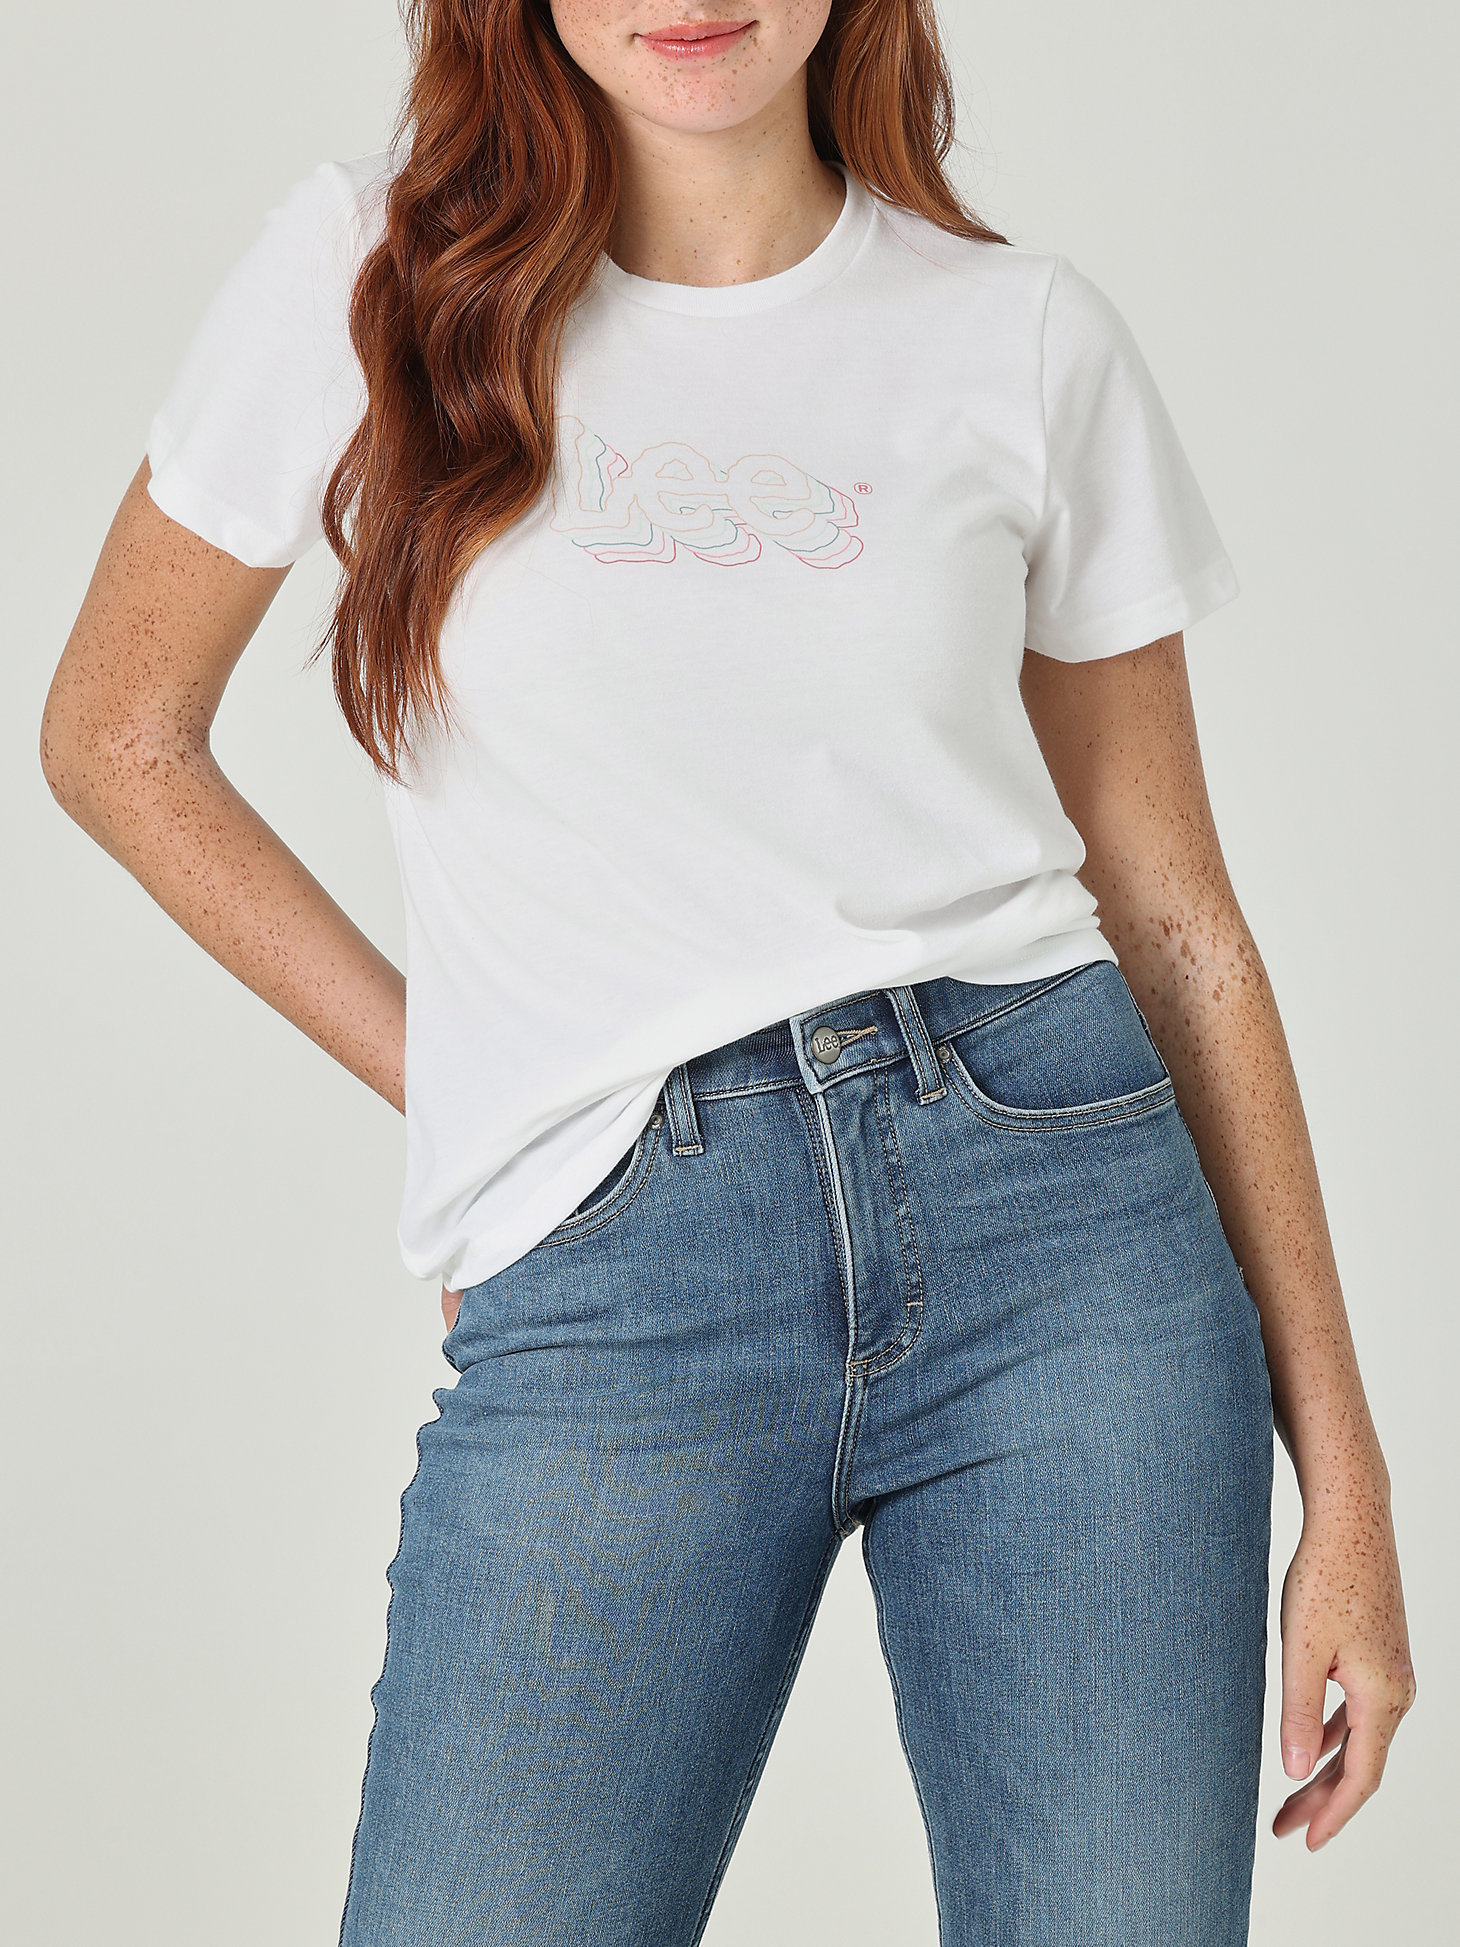 Lee Multi Color Logo Tee in Bright White main view